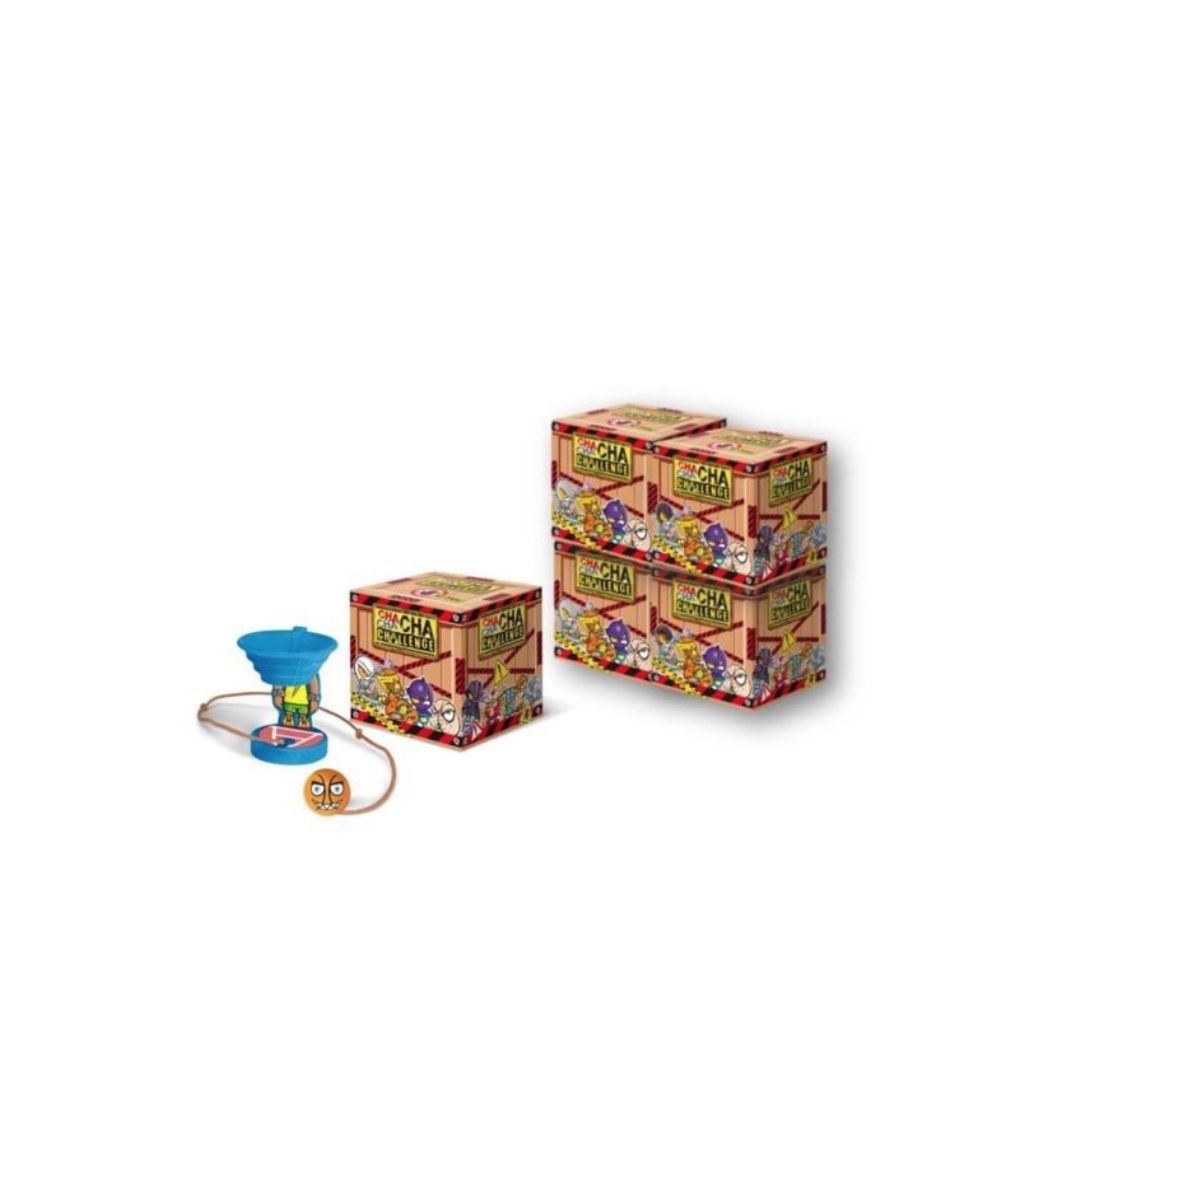 GP TOYS Chachacha challenge pack de 4